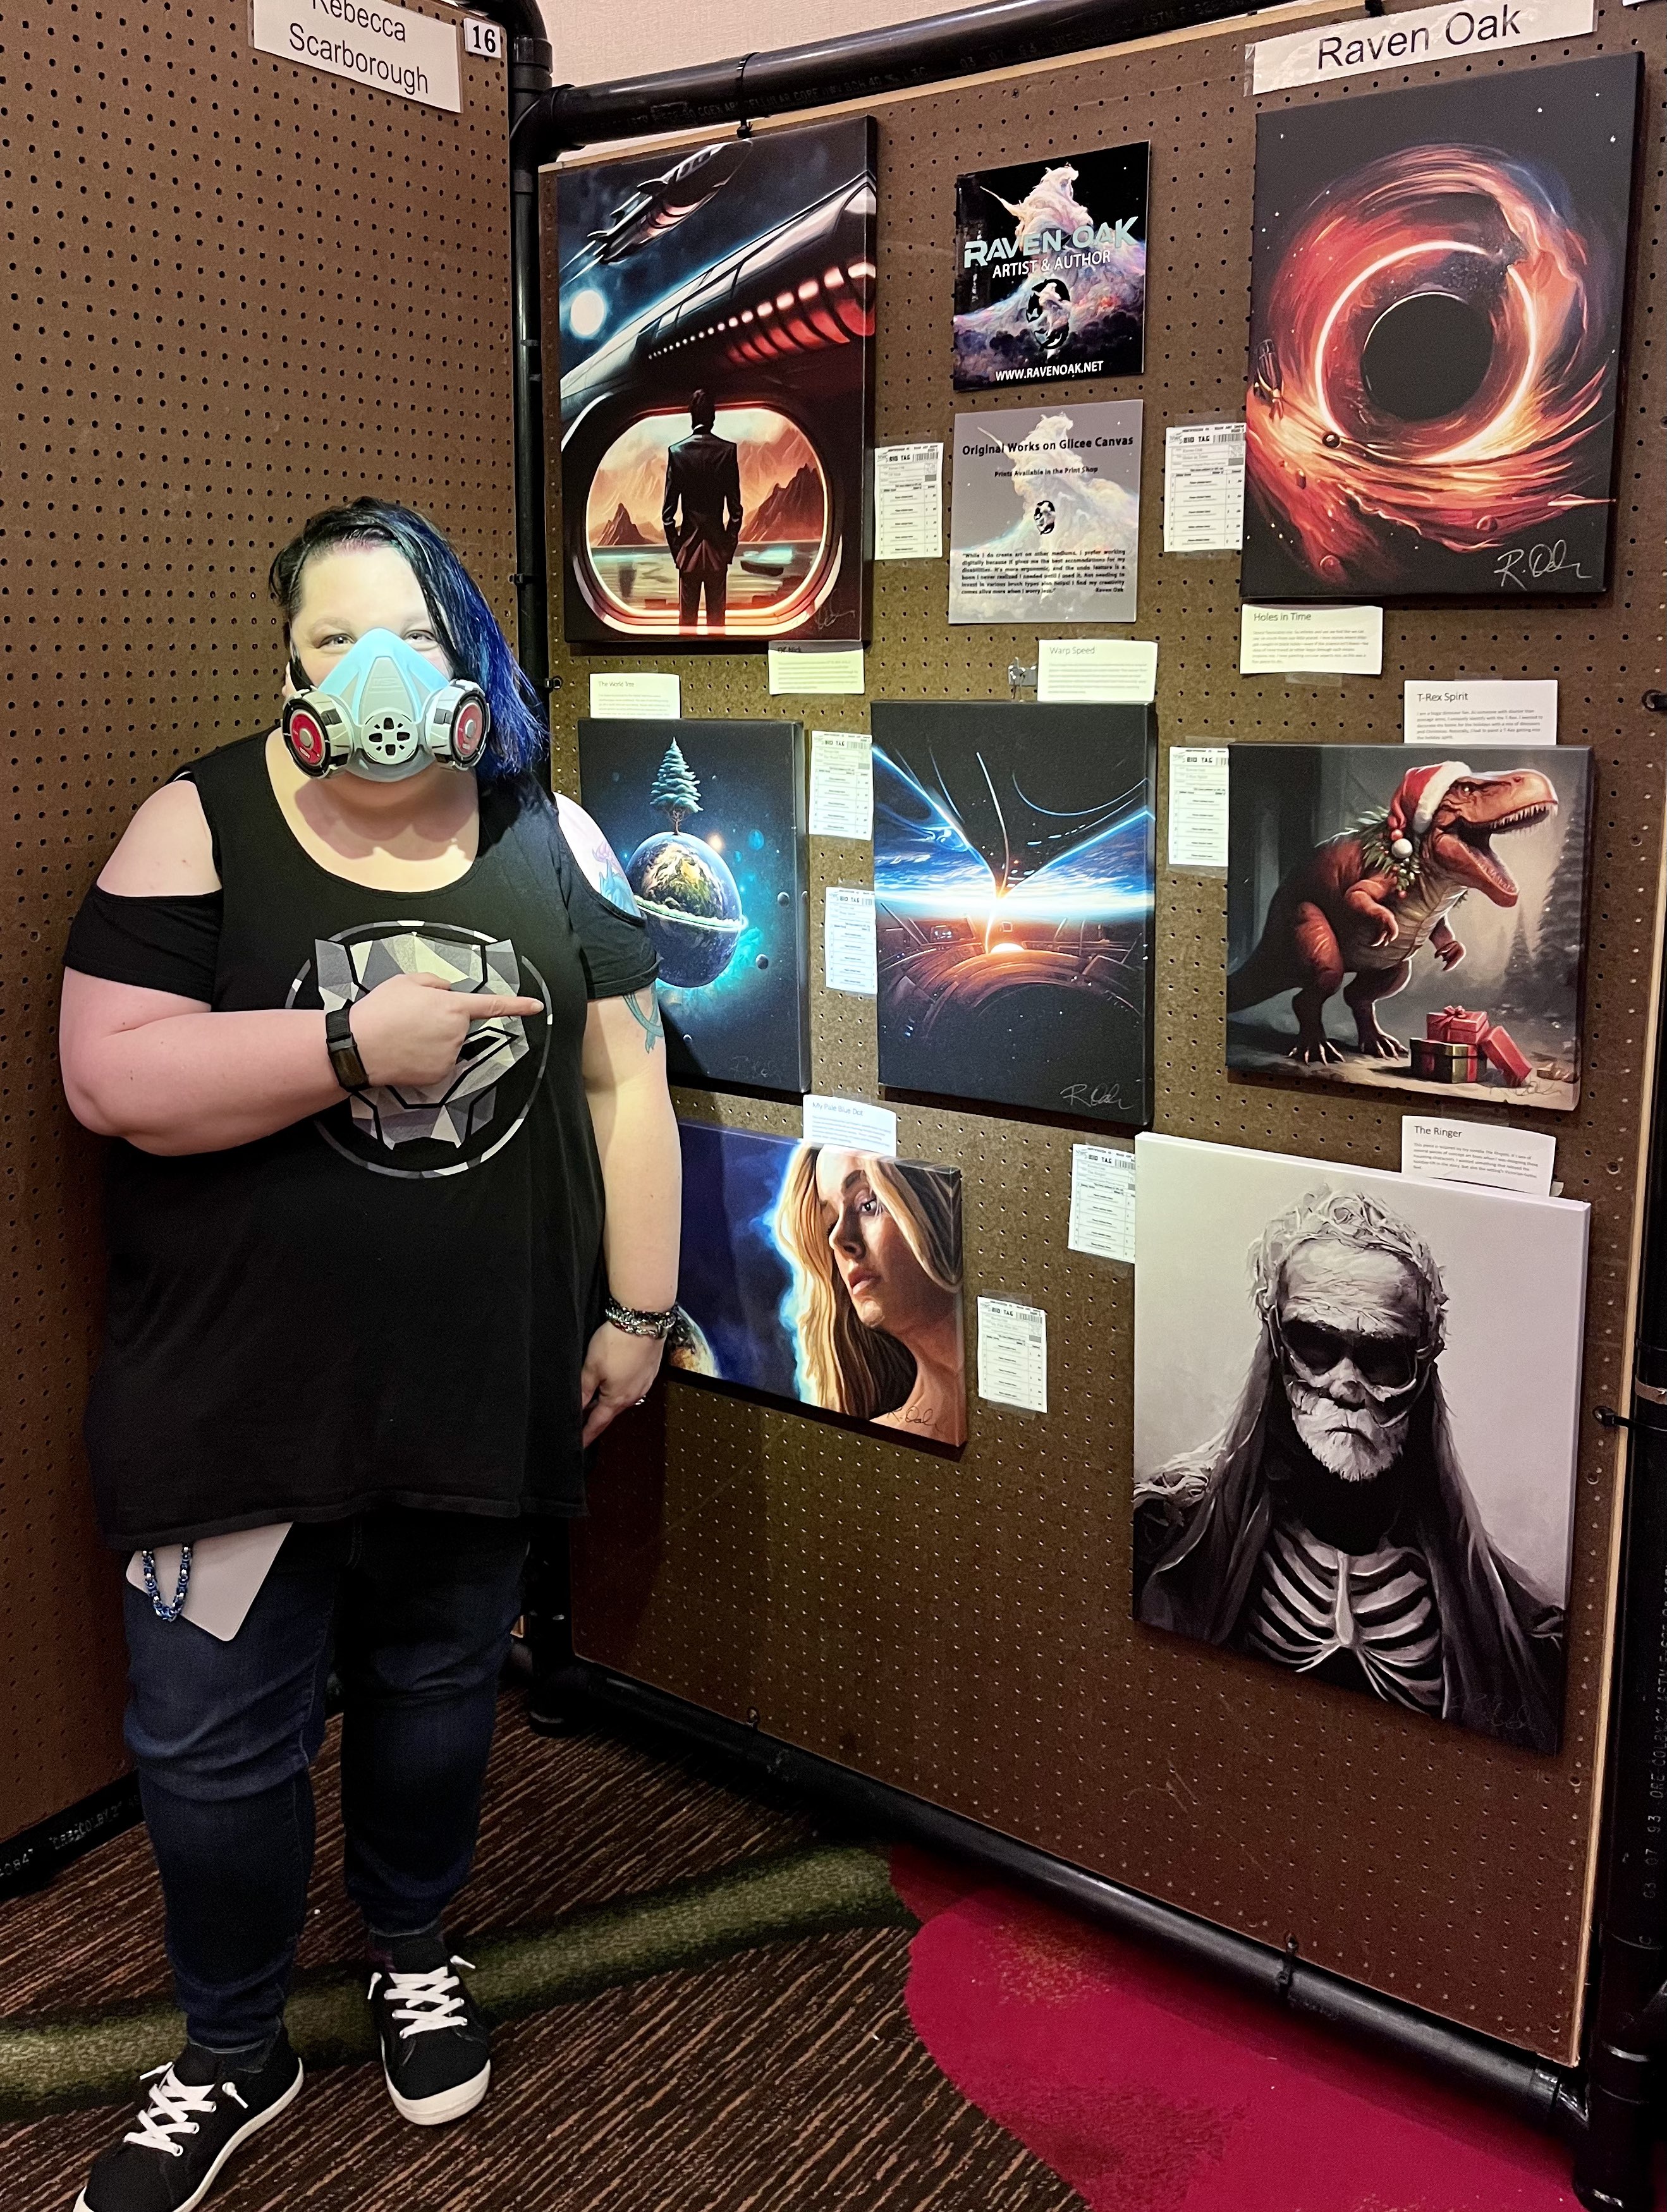 Artist Raven Oak in front of her art work at Norwescon 45's art show